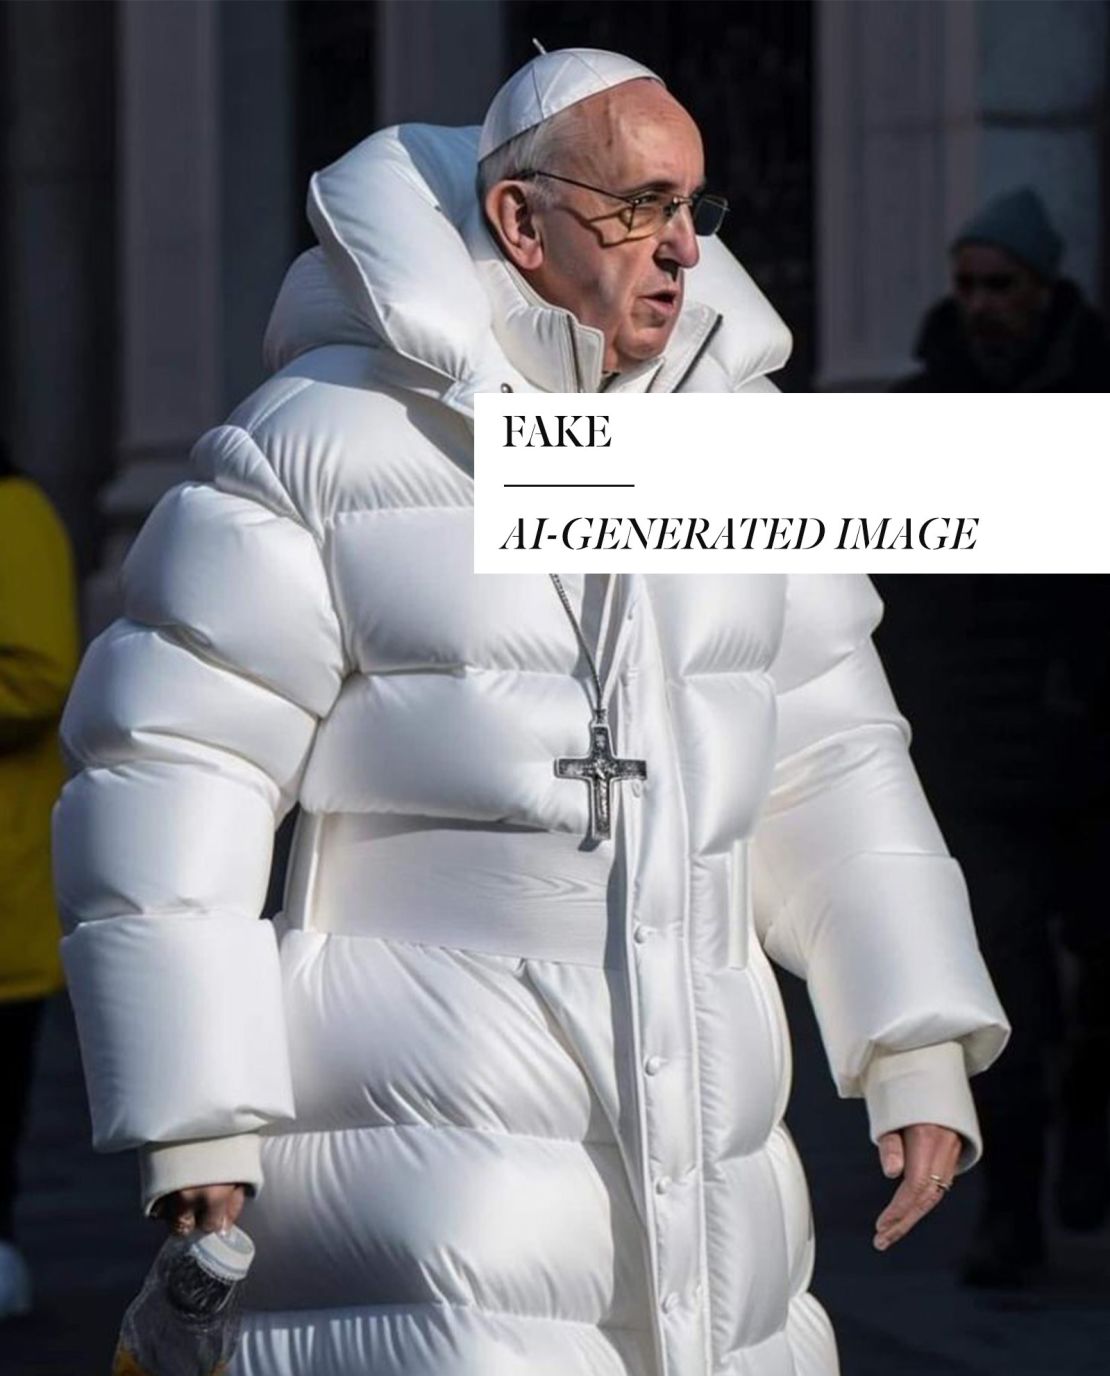 Look of the Week: What Pope Francis' AI puffer coat says about the